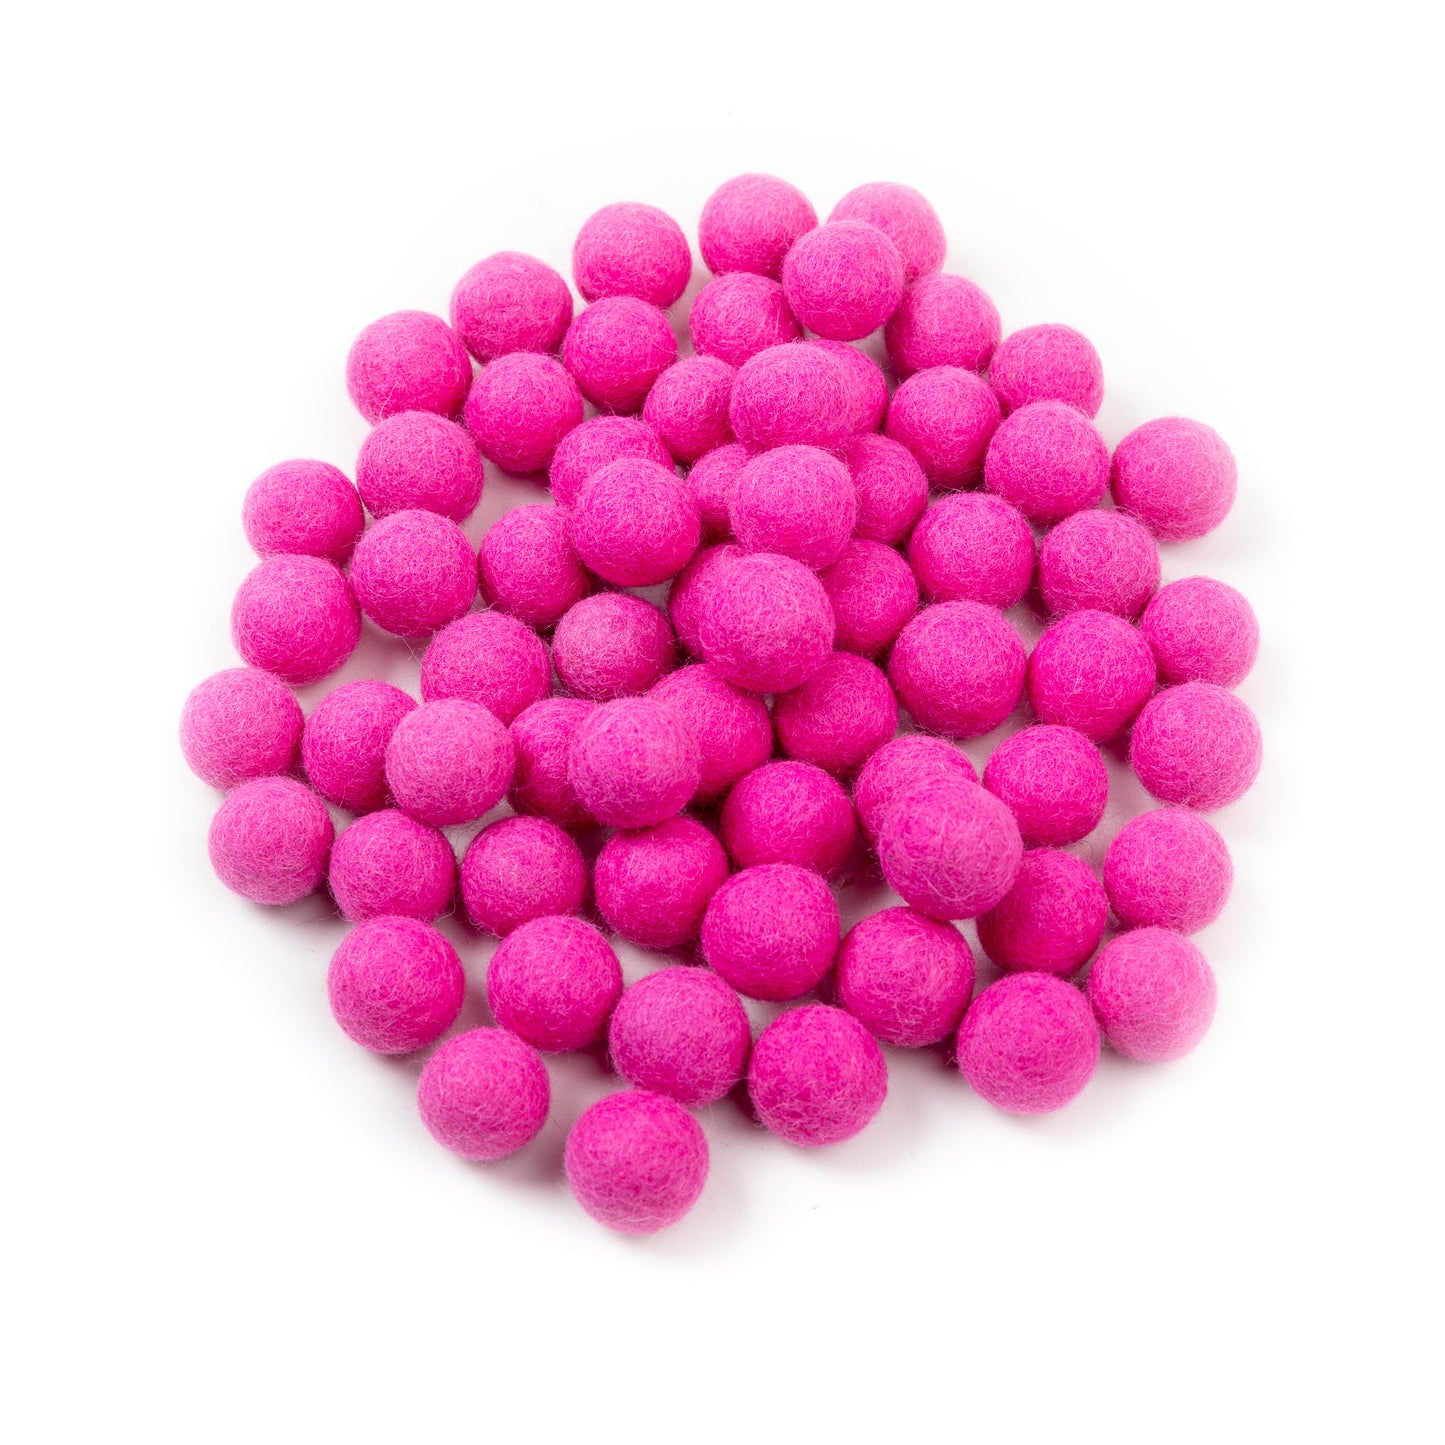 Colorful and Durable 2 cm Felt Balls for Endless Crafting Possibilities